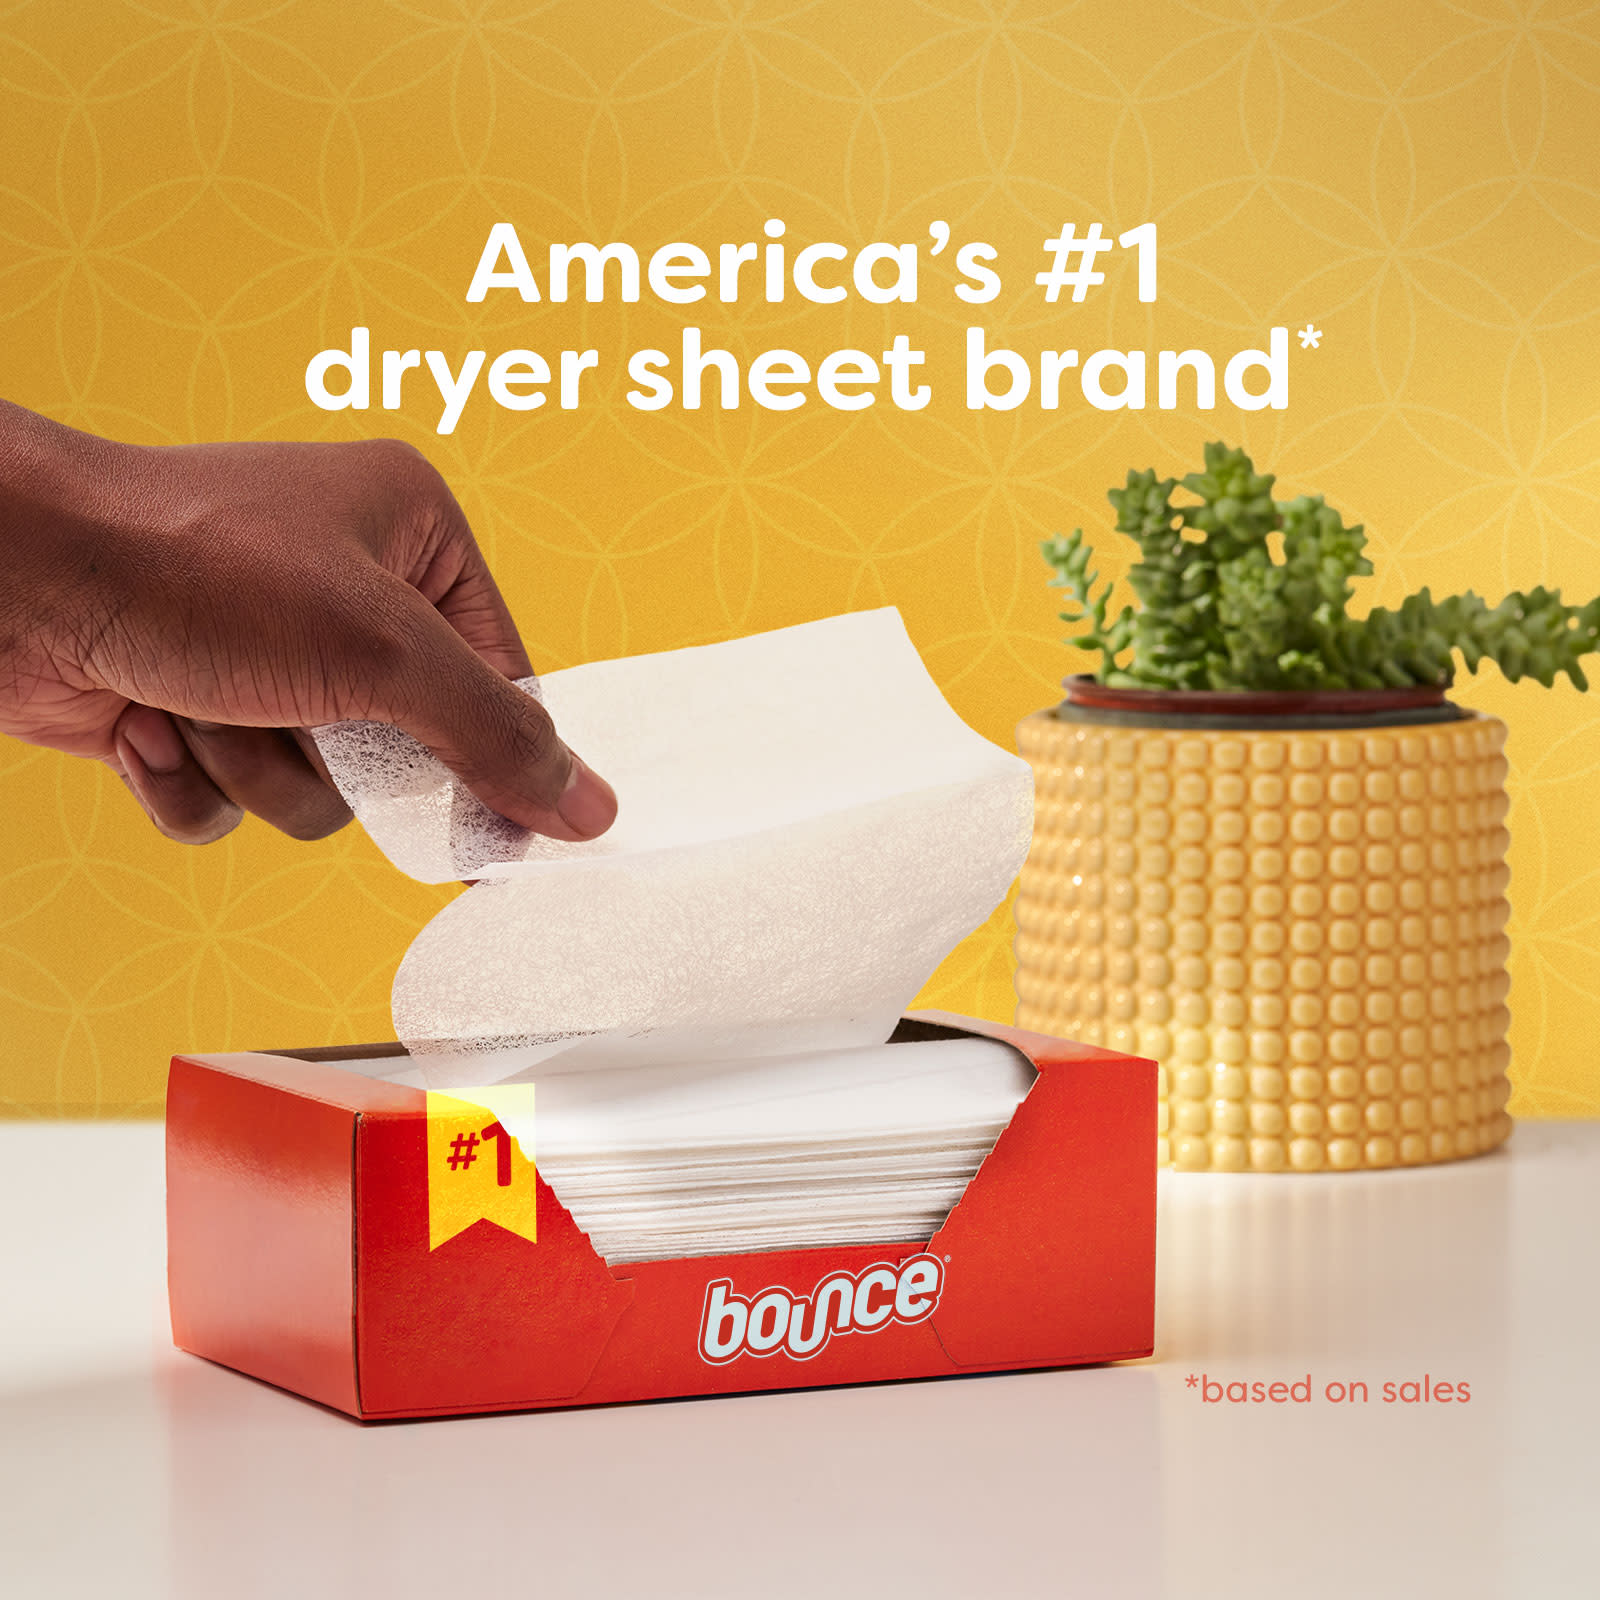 Bounce® Outdoor Fresh™ Fabric Softener Dryer Sheets